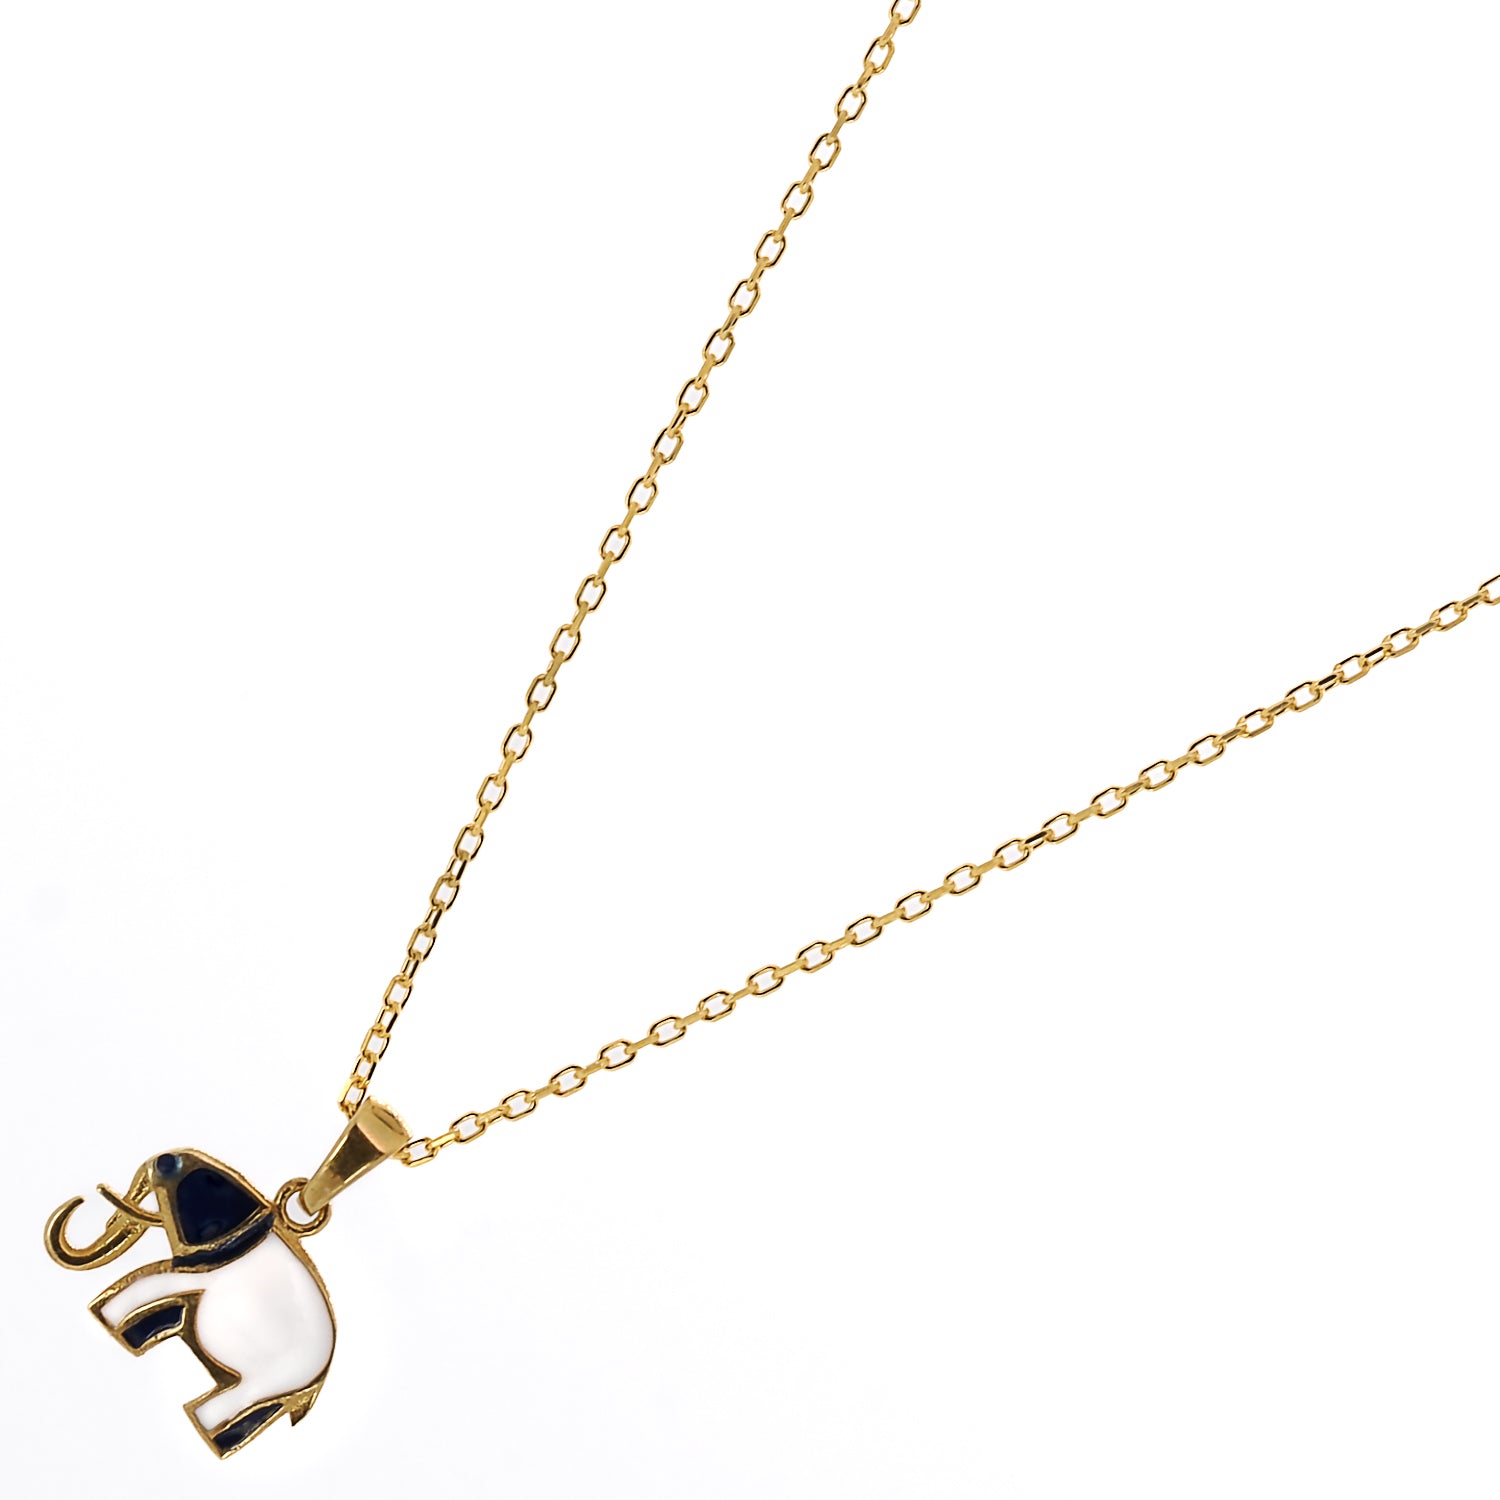 Gold Blue And White Elephant Necklace, a meaningful accessory handcrafted with care and attention to detail.